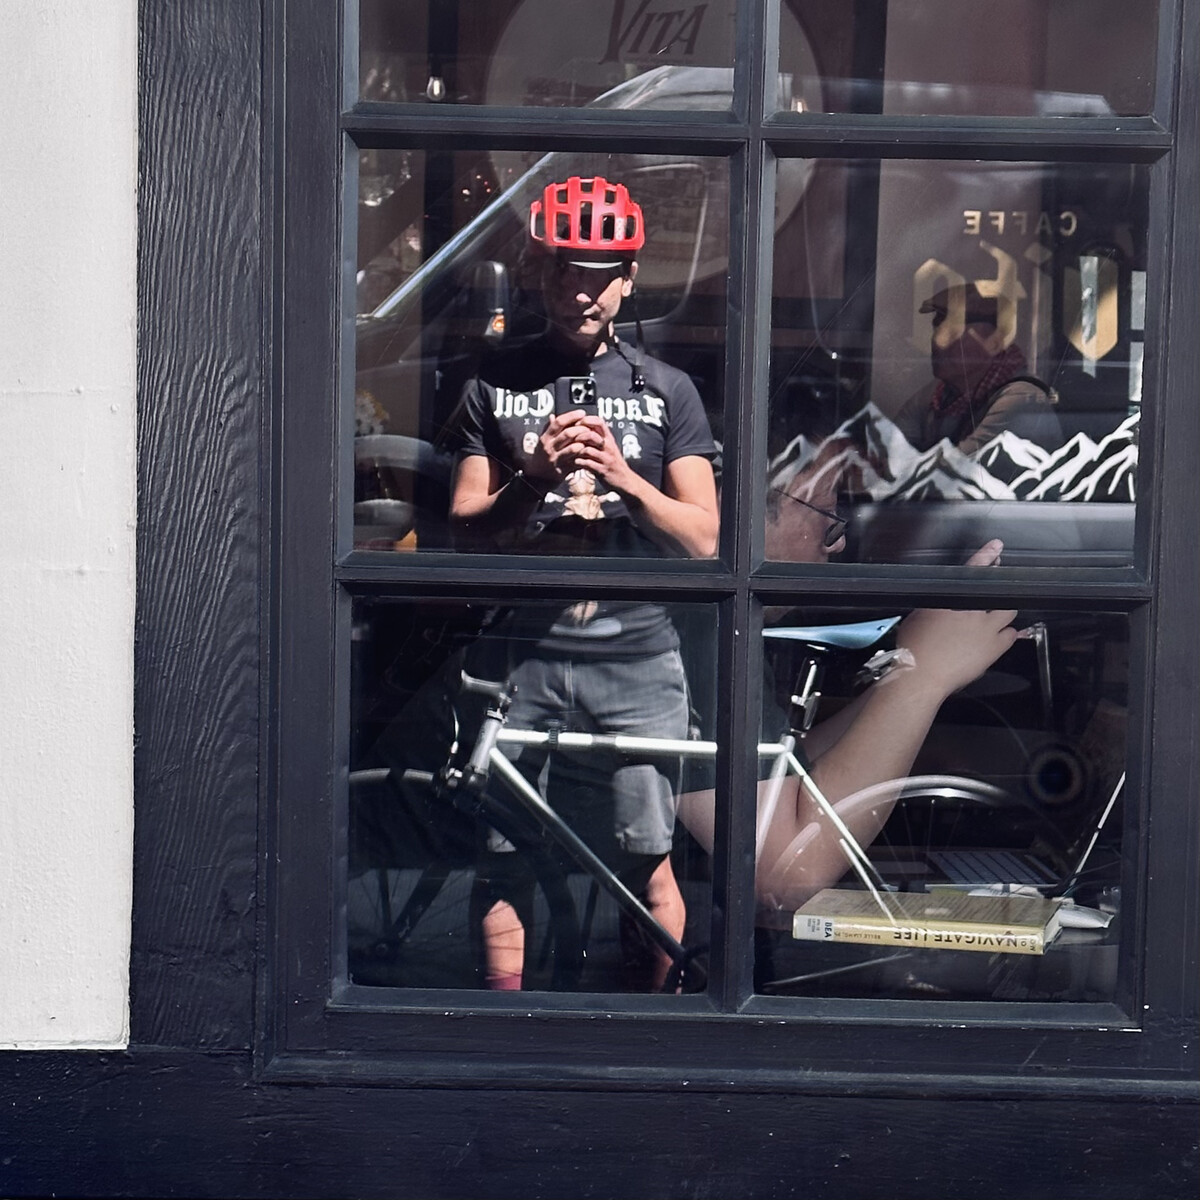 Photo of me and my bike reflected in a window.